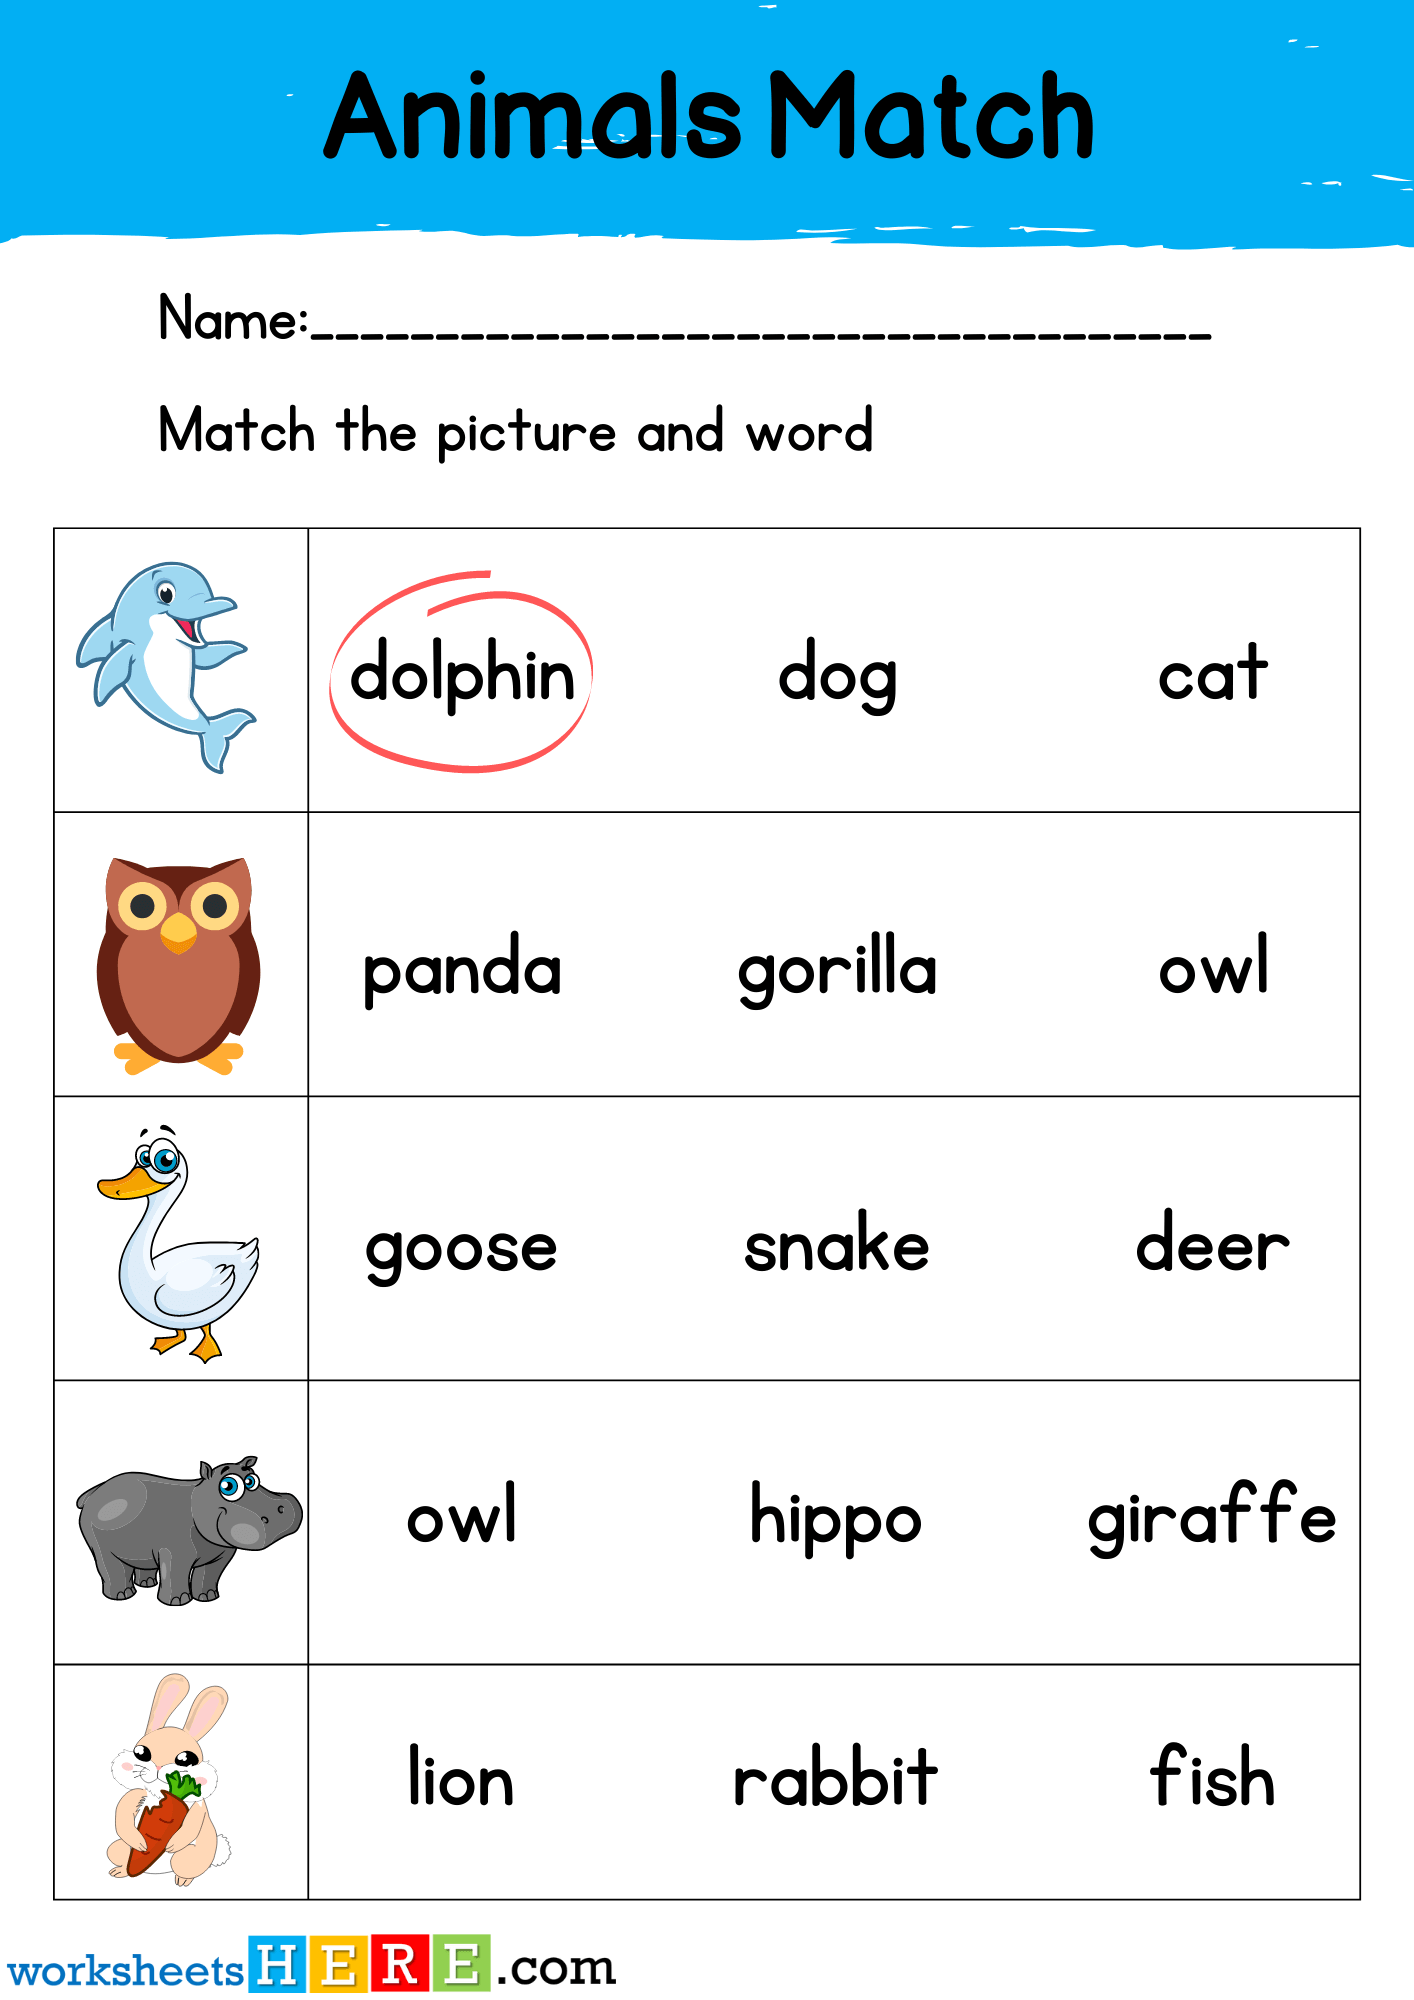 Animals Names Match with Pictures Activity PDF Worksheet For Kids